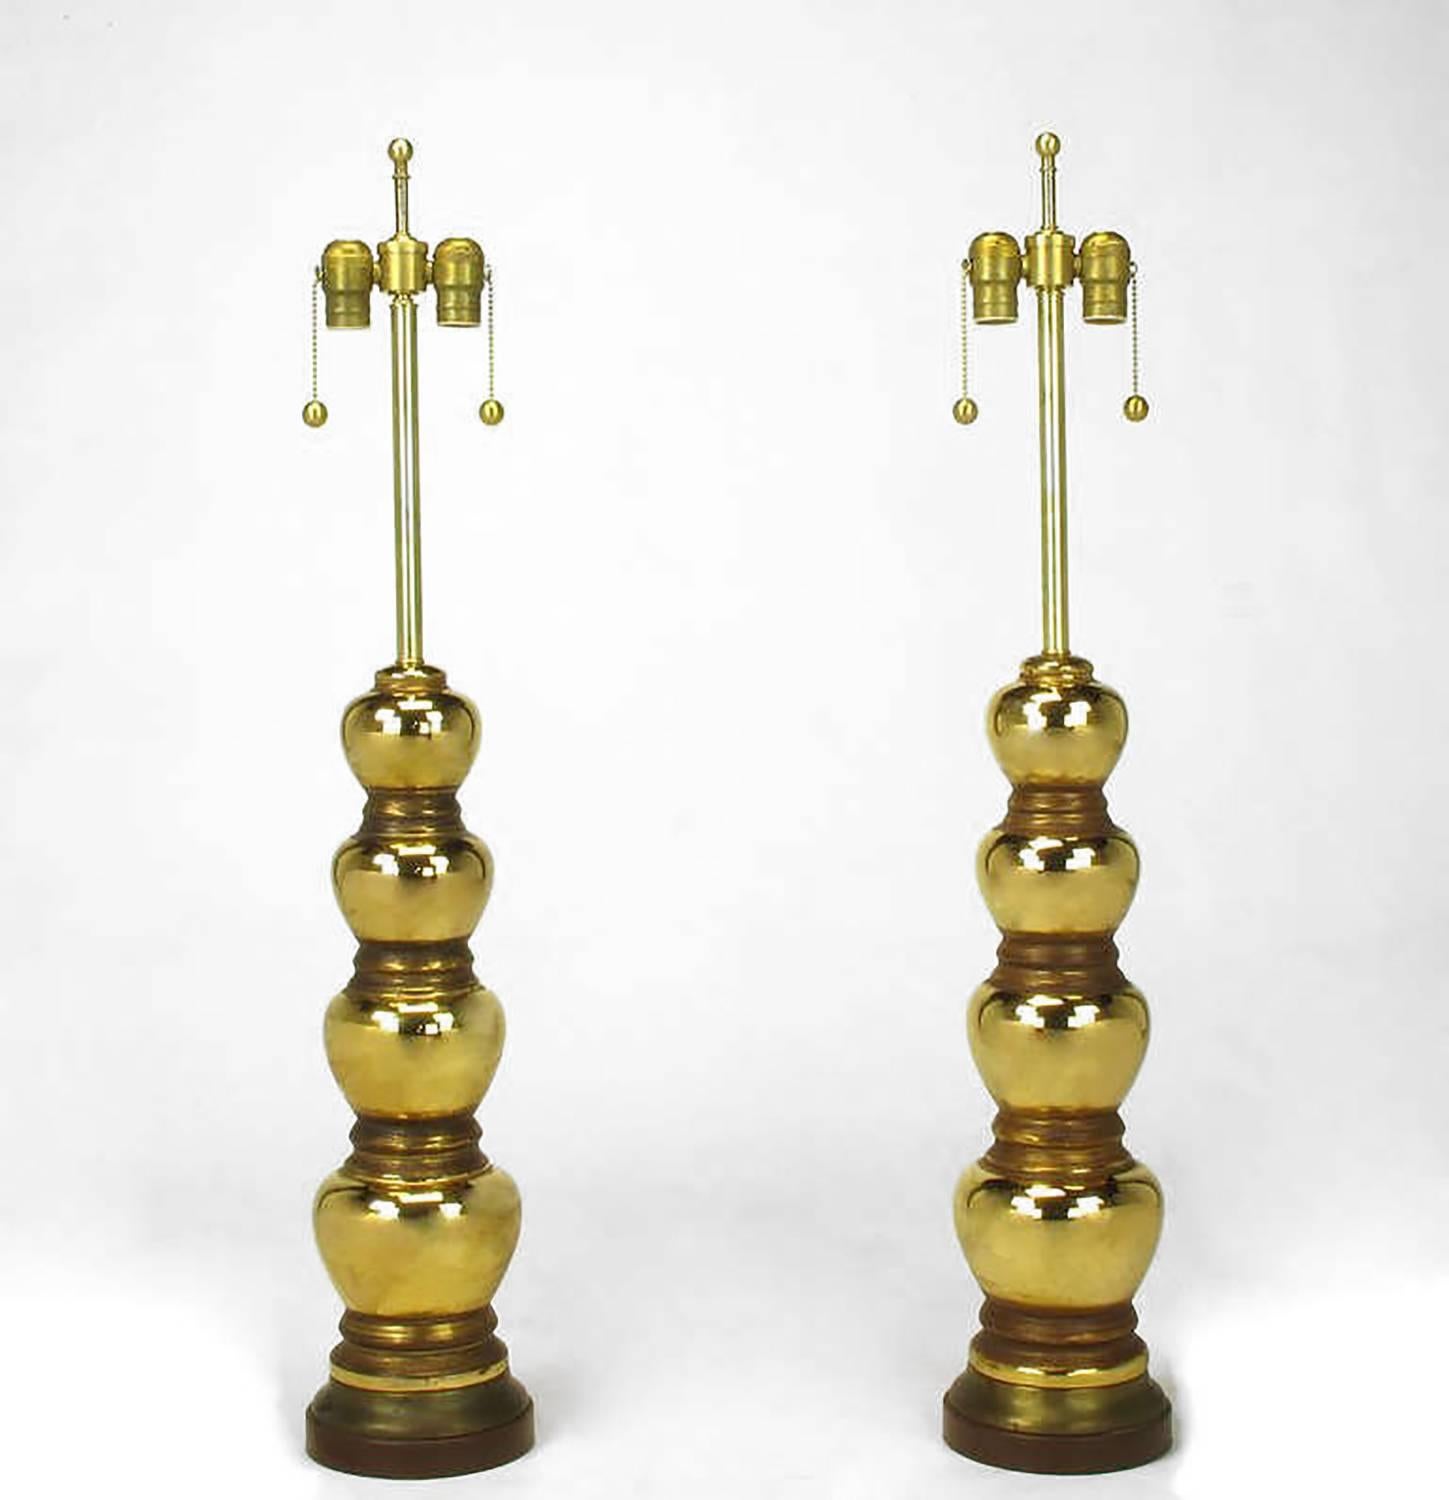 Hollywood Regency Pair of 1930s Gold-Plated Mirror Glazed Porcelain Quadruple Gourd Table Lamps For Sale